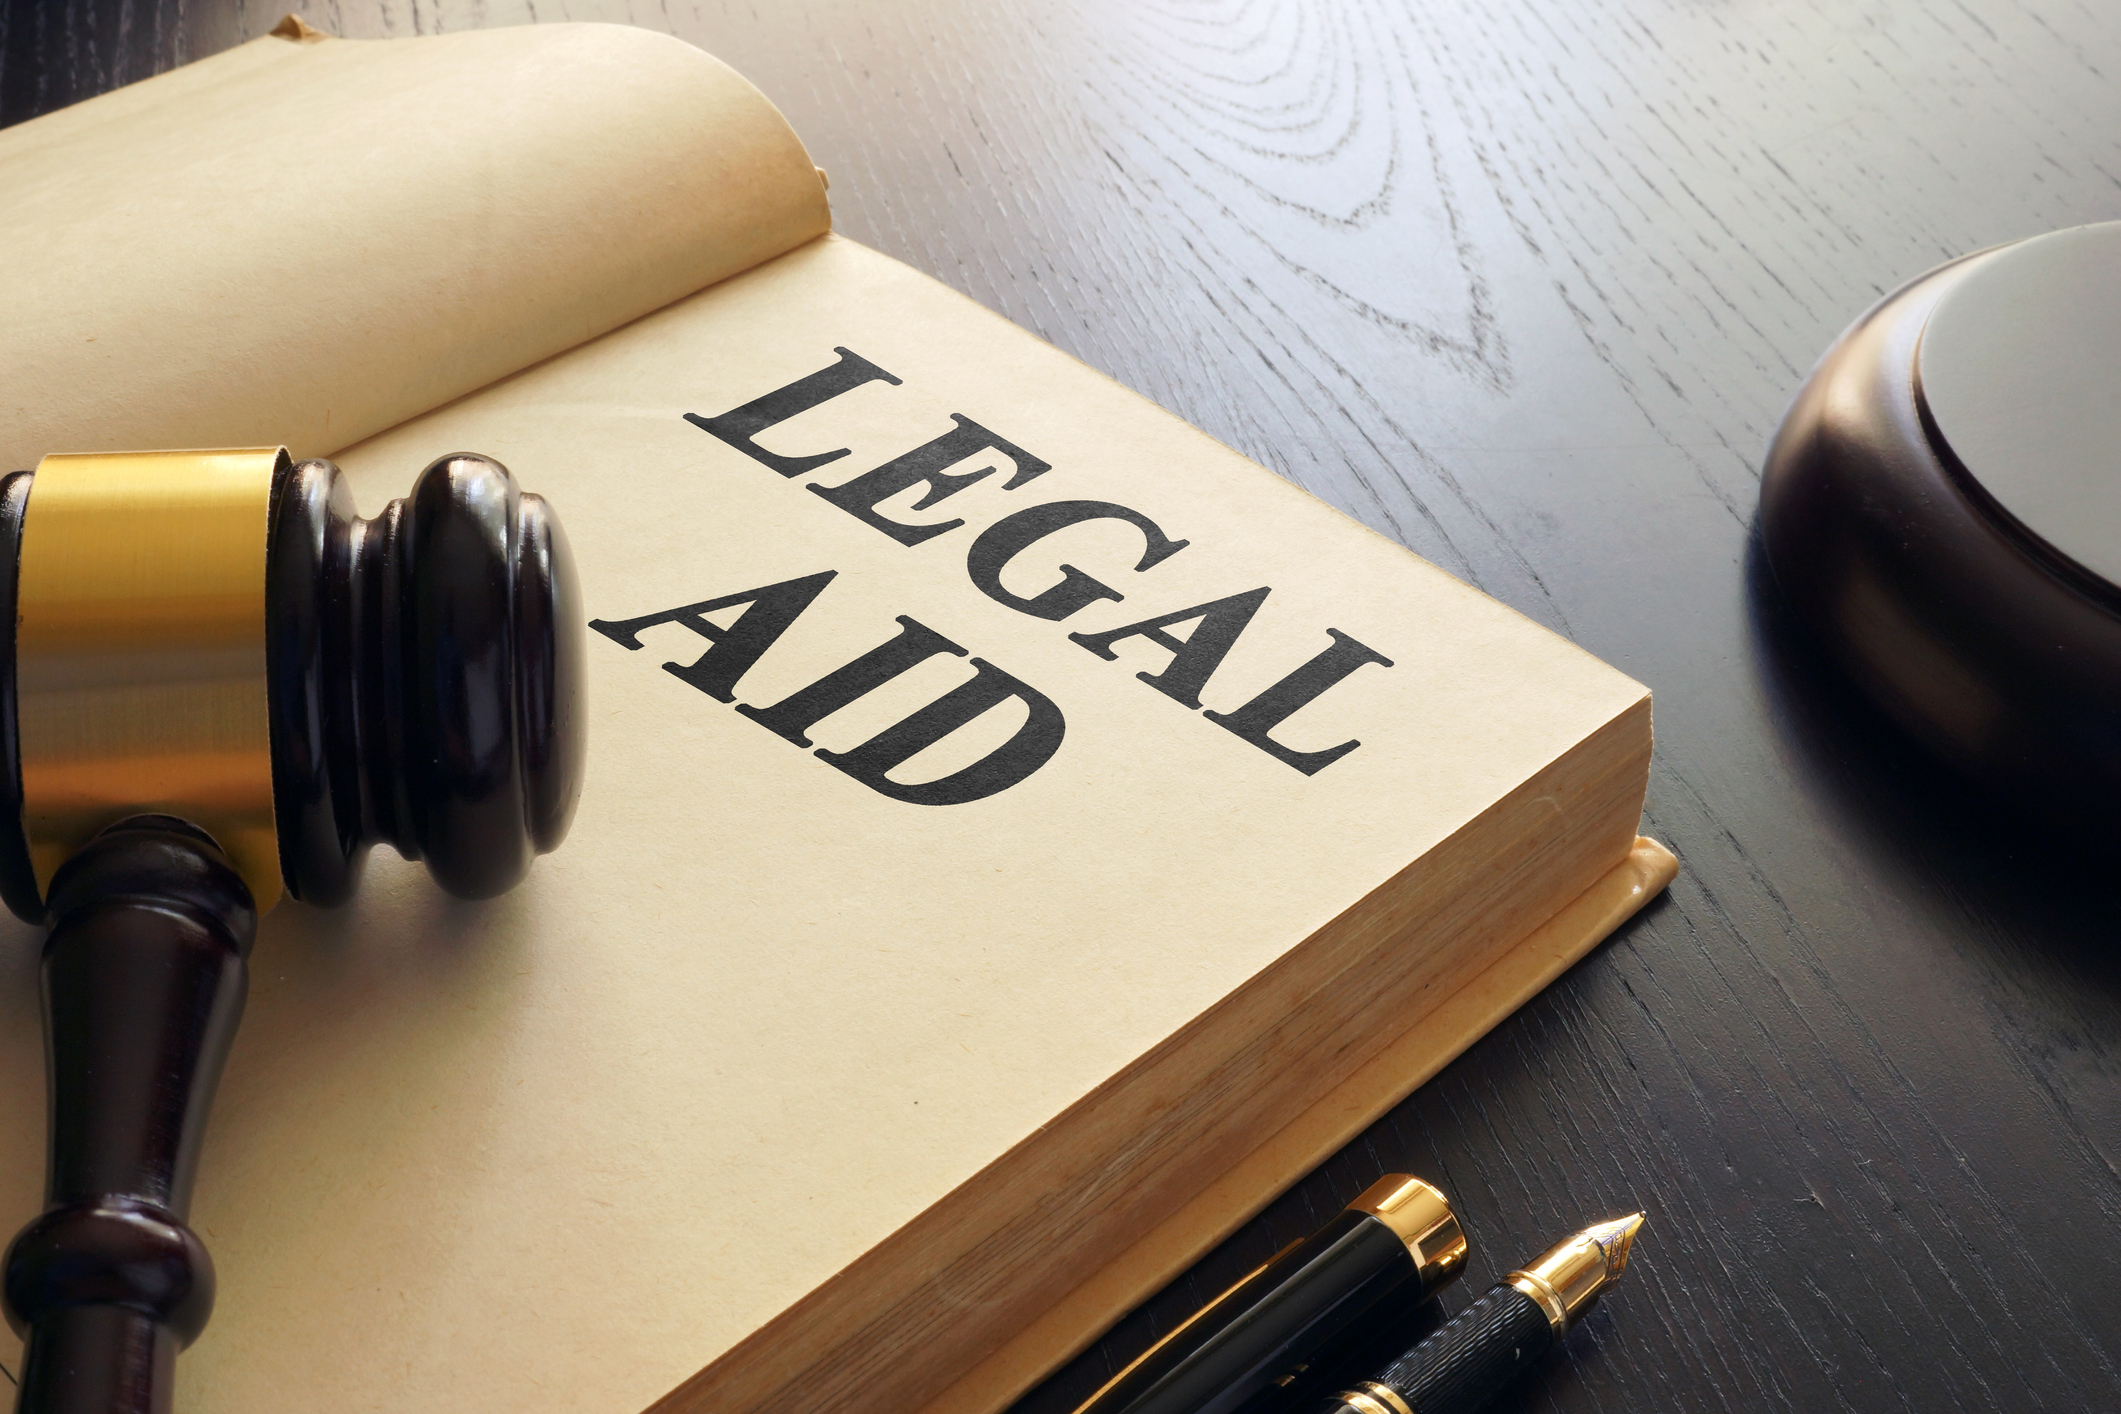 Legal Aid for Single Parents: Family Lawyers as Advocates
